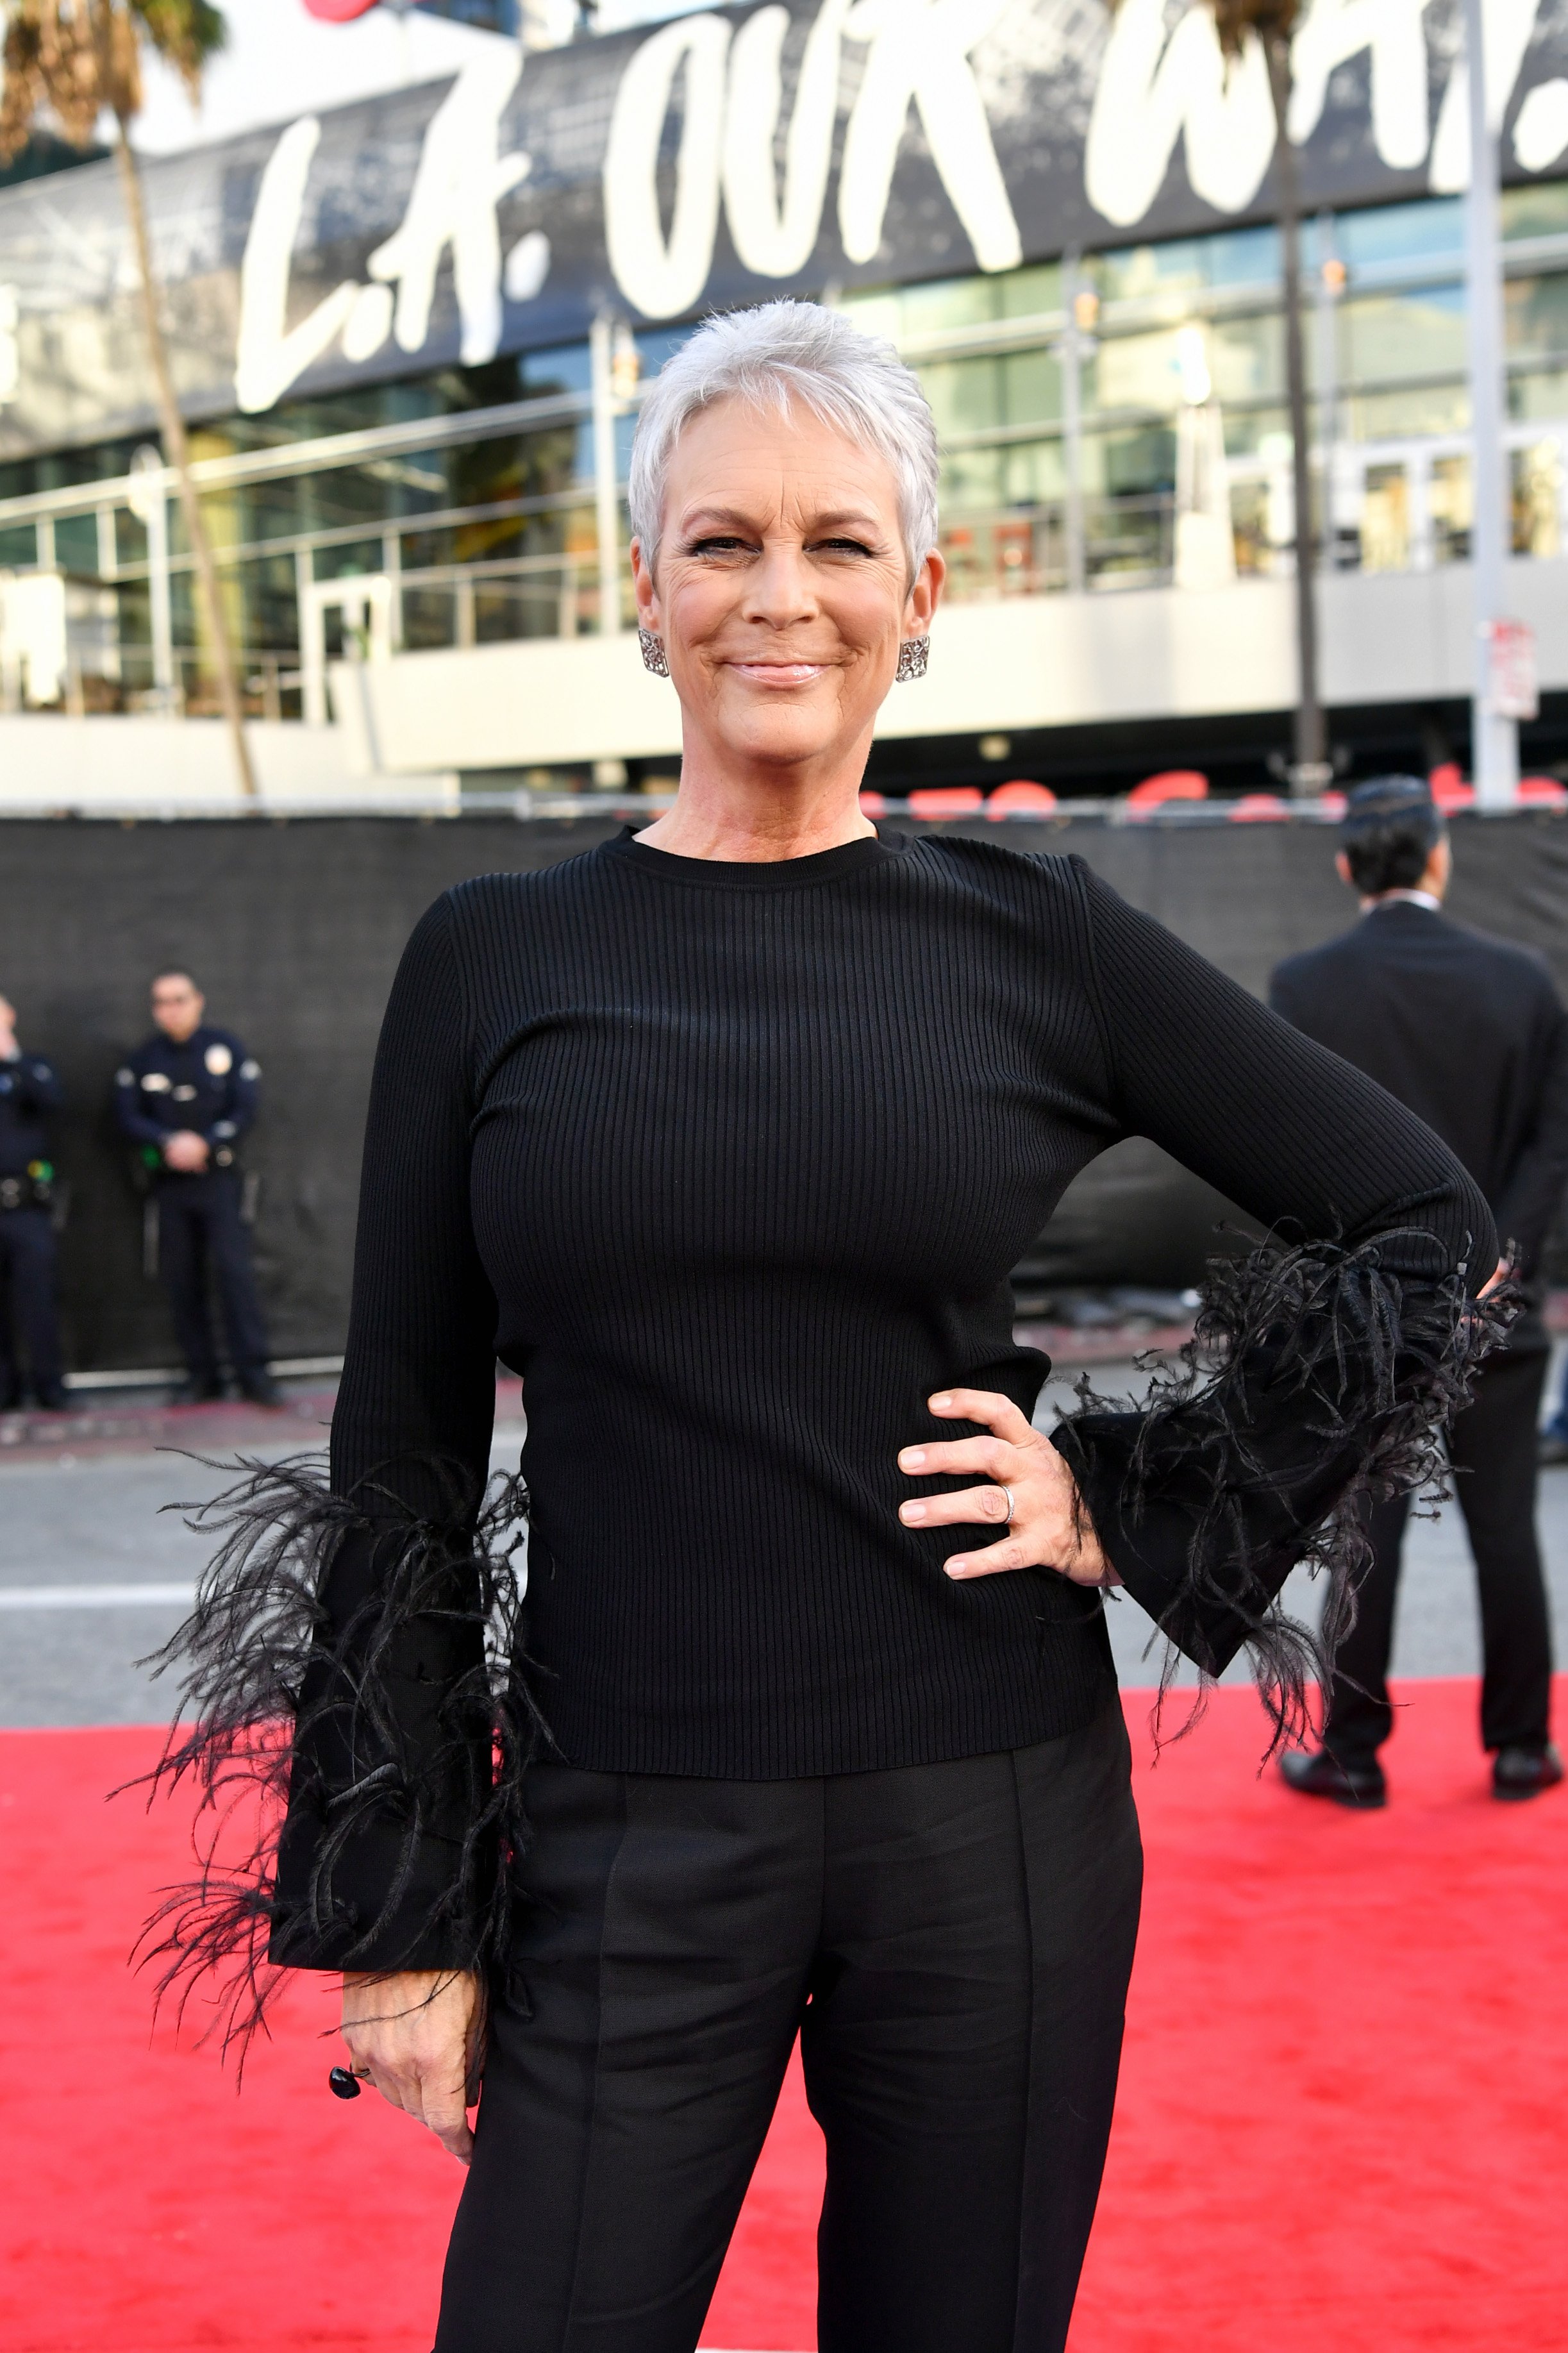 Jamie Lee Curtis on November 24, 2019 in Los Angeles, California | Photo: Getty Images